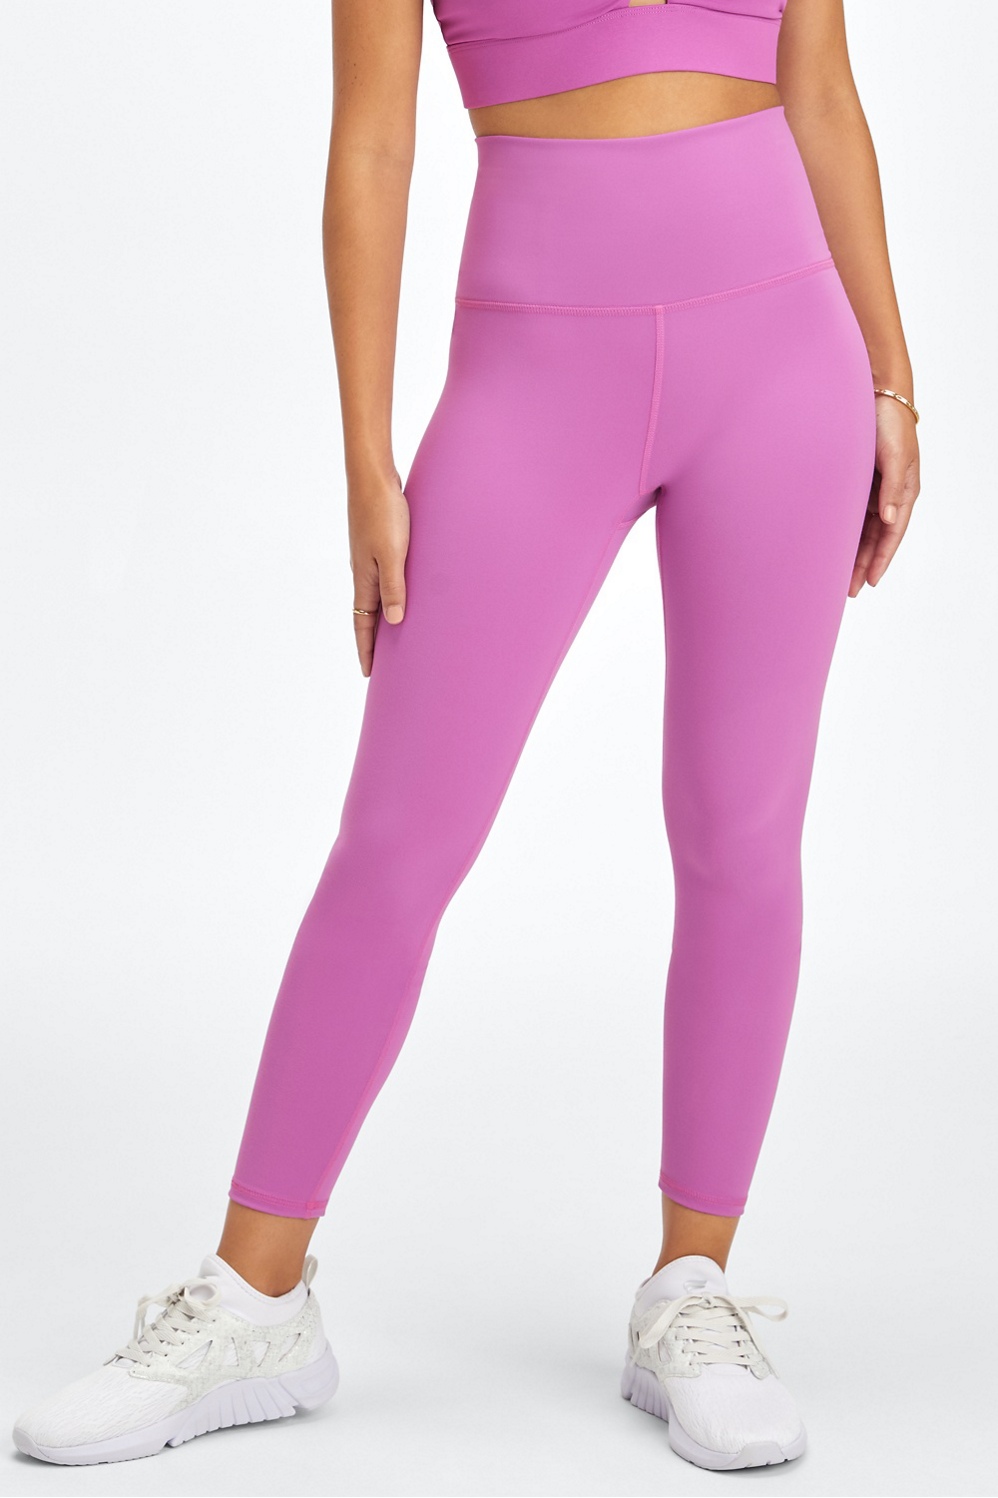 Fabletics Women's PureLuxe Ultra High-Waisted 7/8 Legging, Light  Compression, Buttery Soft